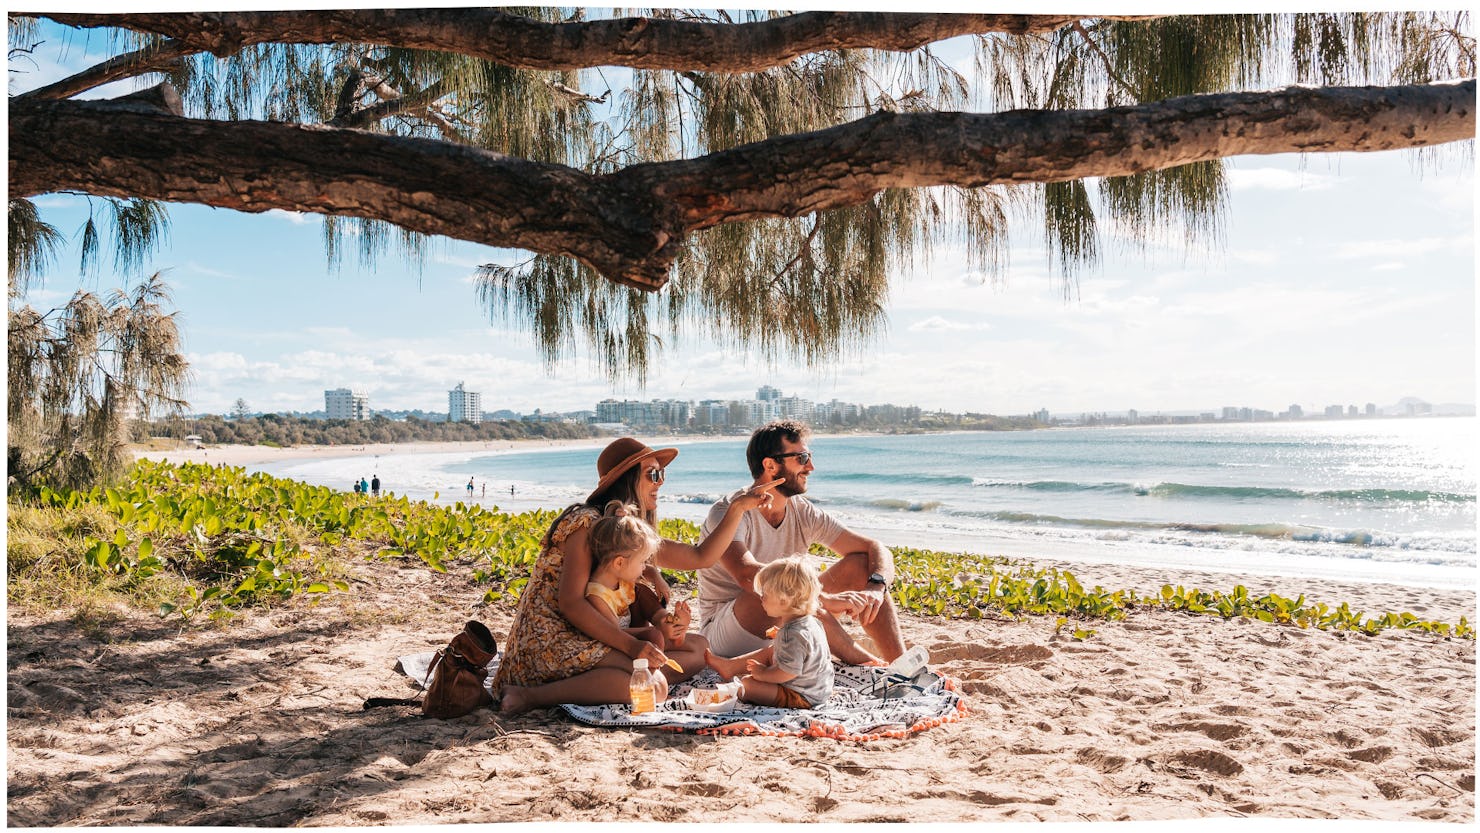 Family Picnic at Mooloolaba Beach (The Spit)